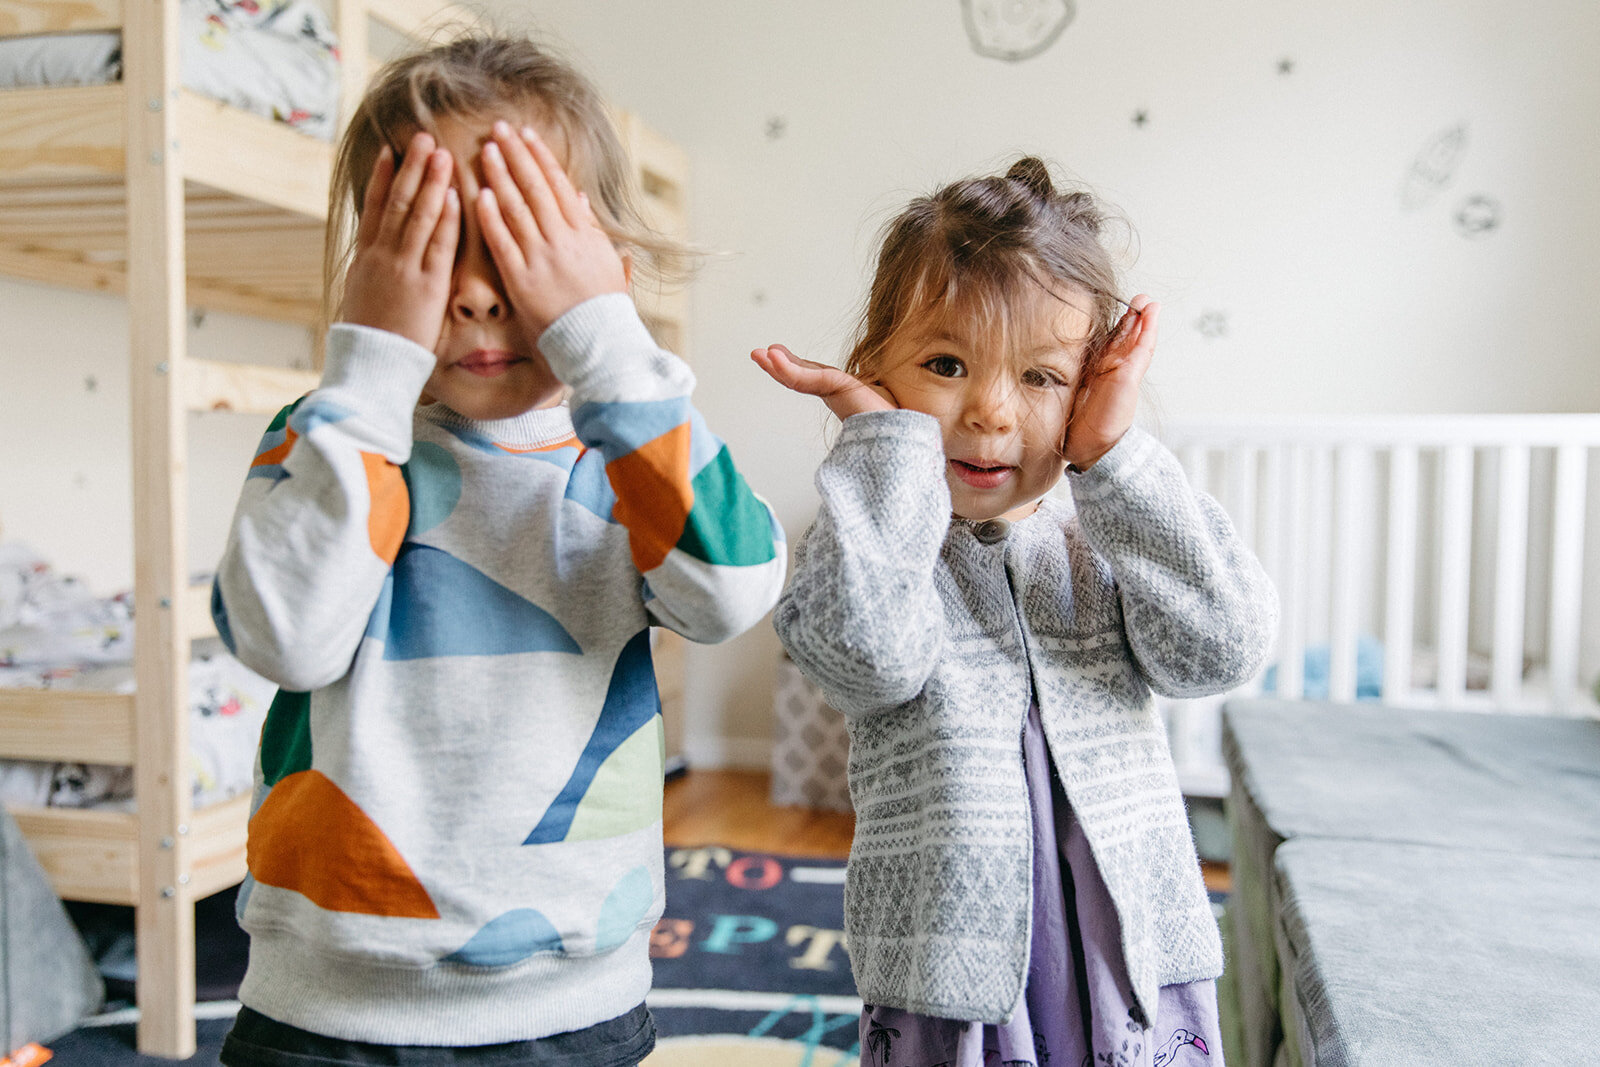 photo of two young kids playing peekaboo with the camera